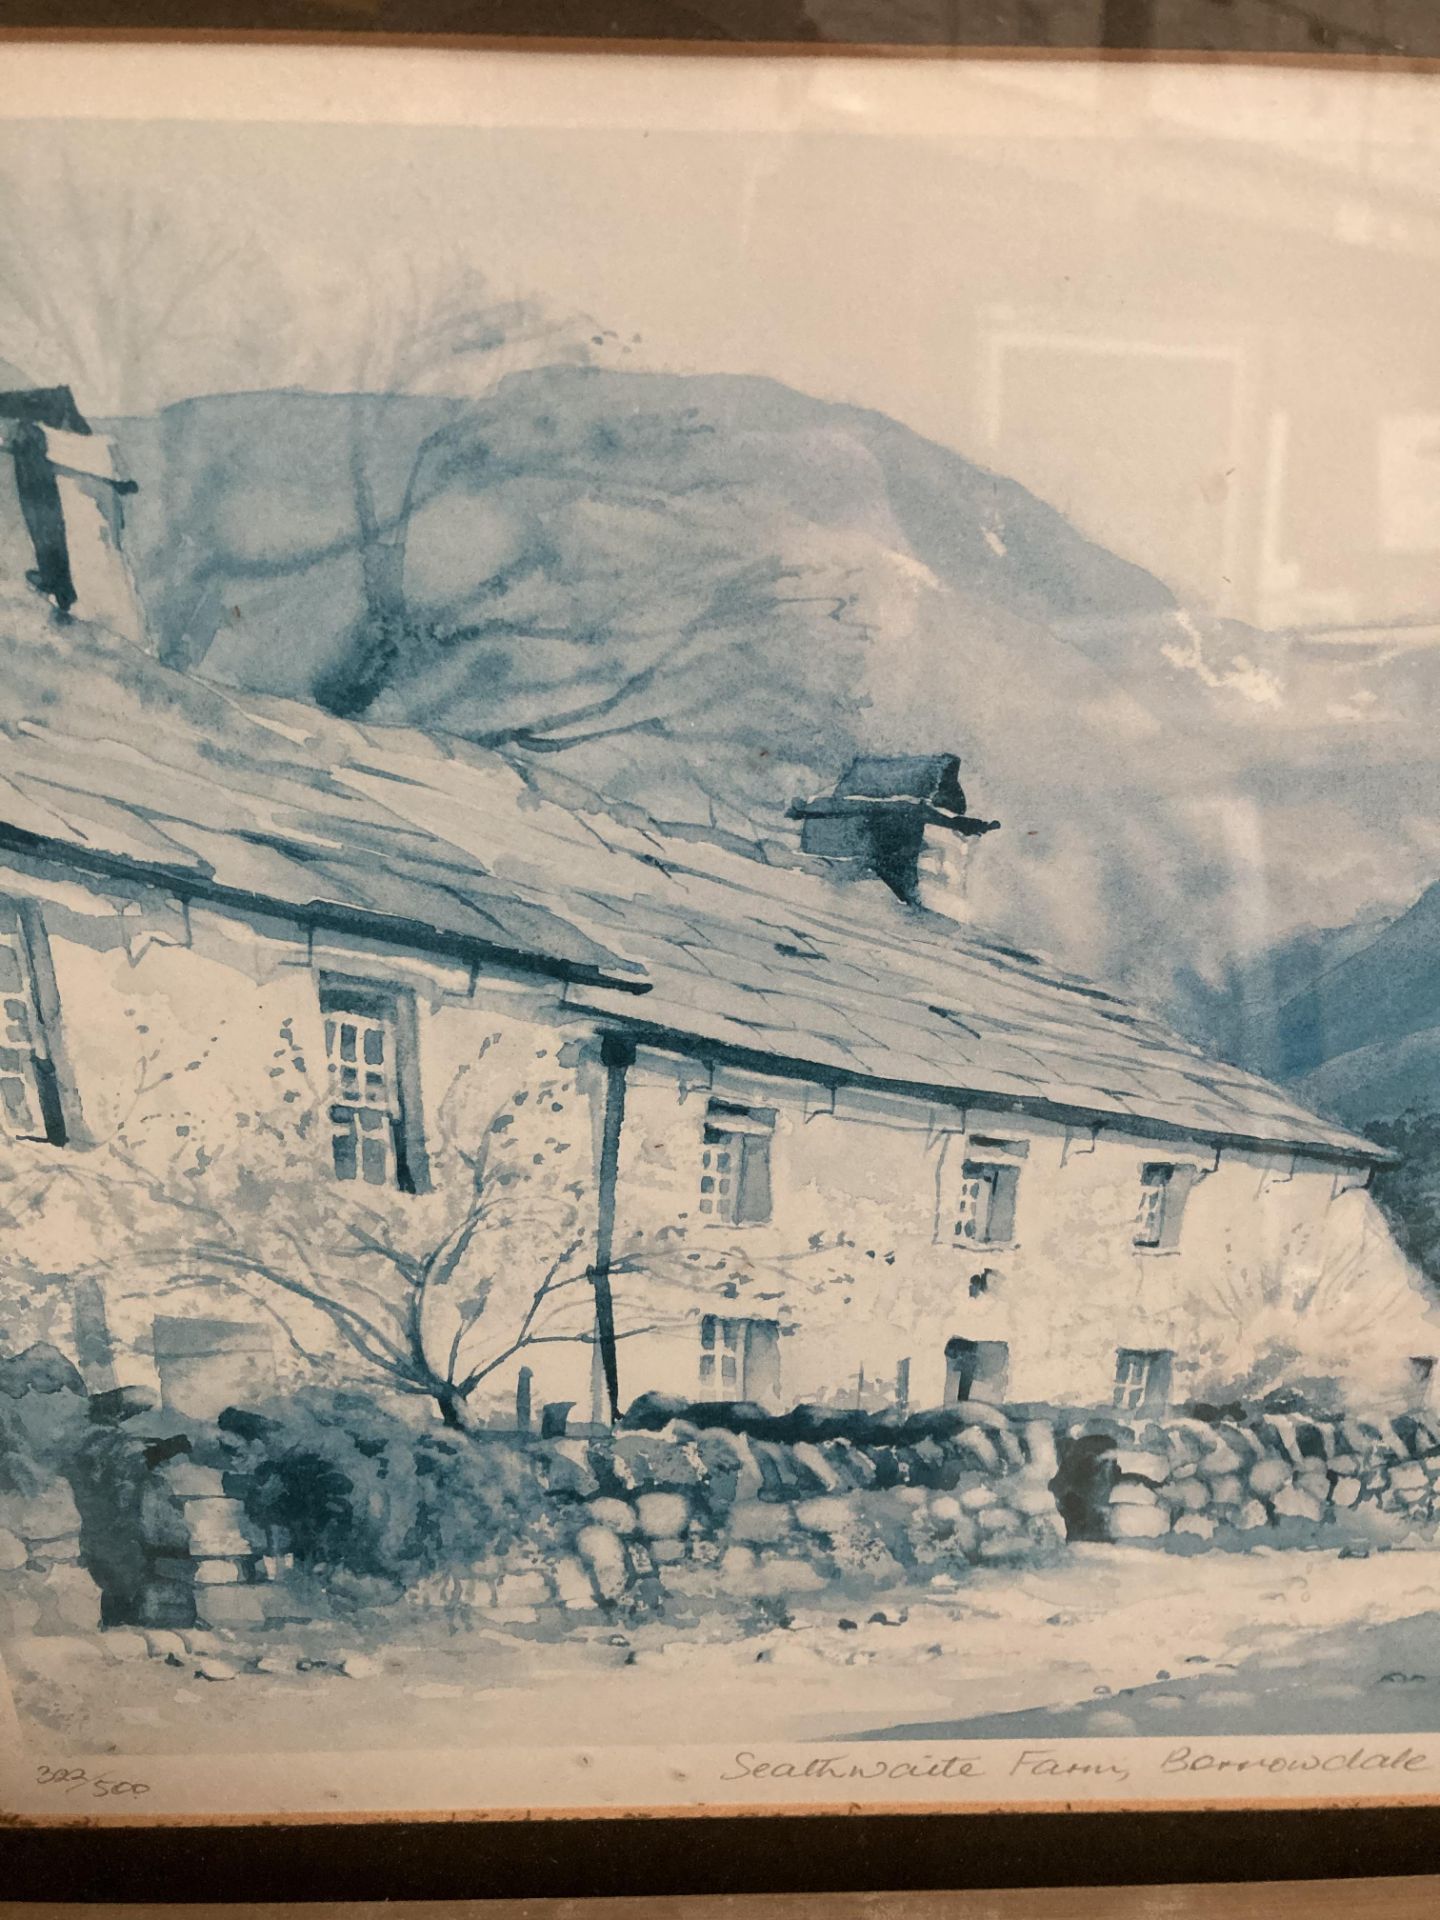 Judy Boyes, a set of four signed limited edition prints, Seathwaite Farm Barrowdale, no. - Image 5 of 6